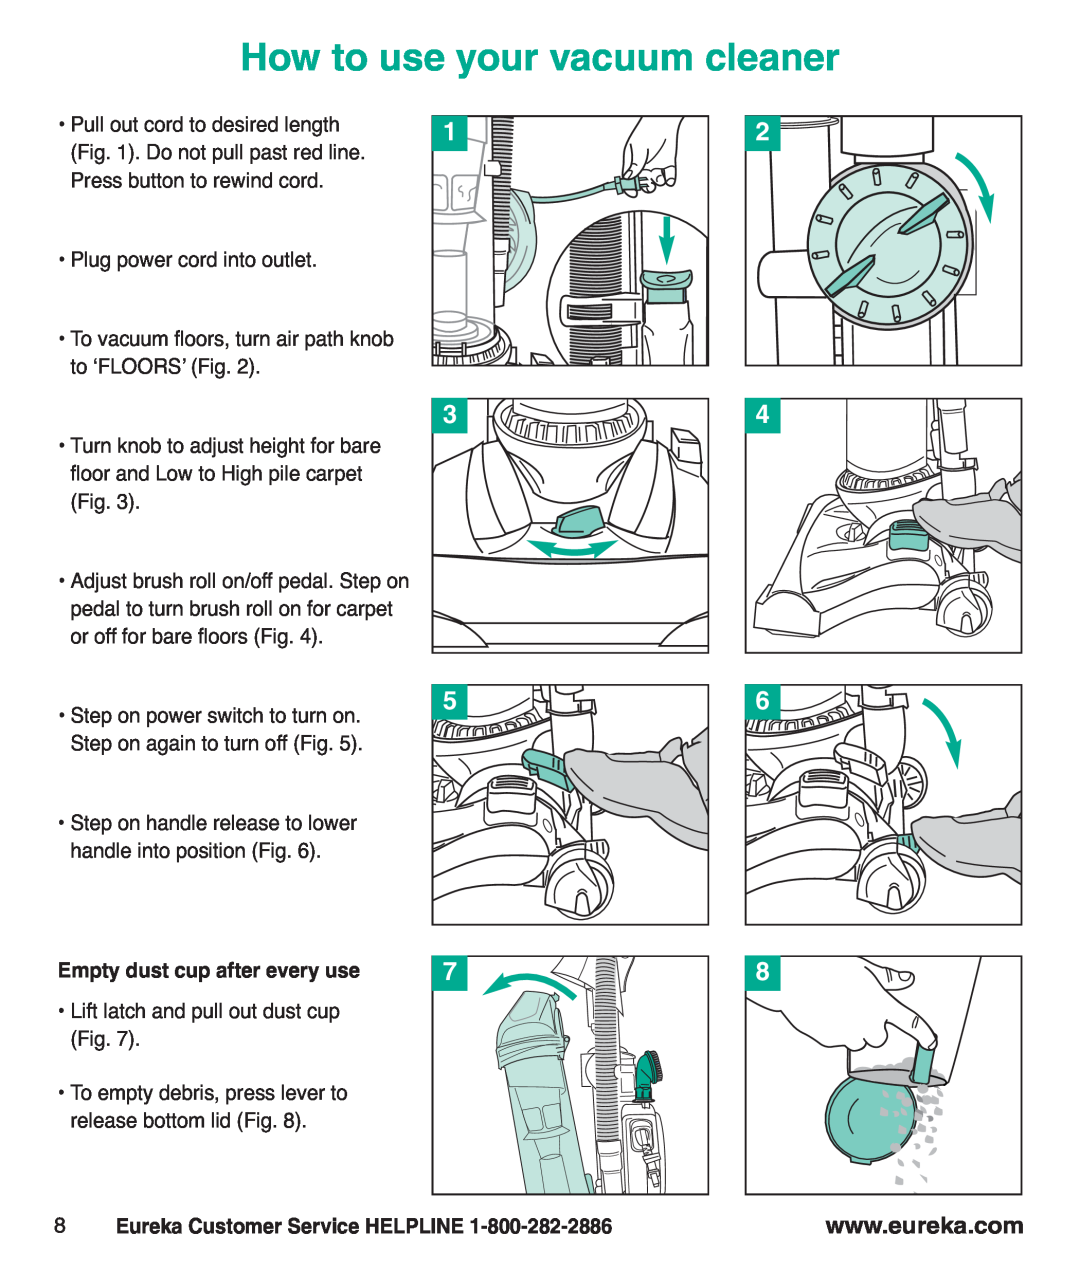 Eureka AS3100 manual How to use your vacuum cleaner, Empty dust cup after every use, Eureka Customer Service HELPLINE 